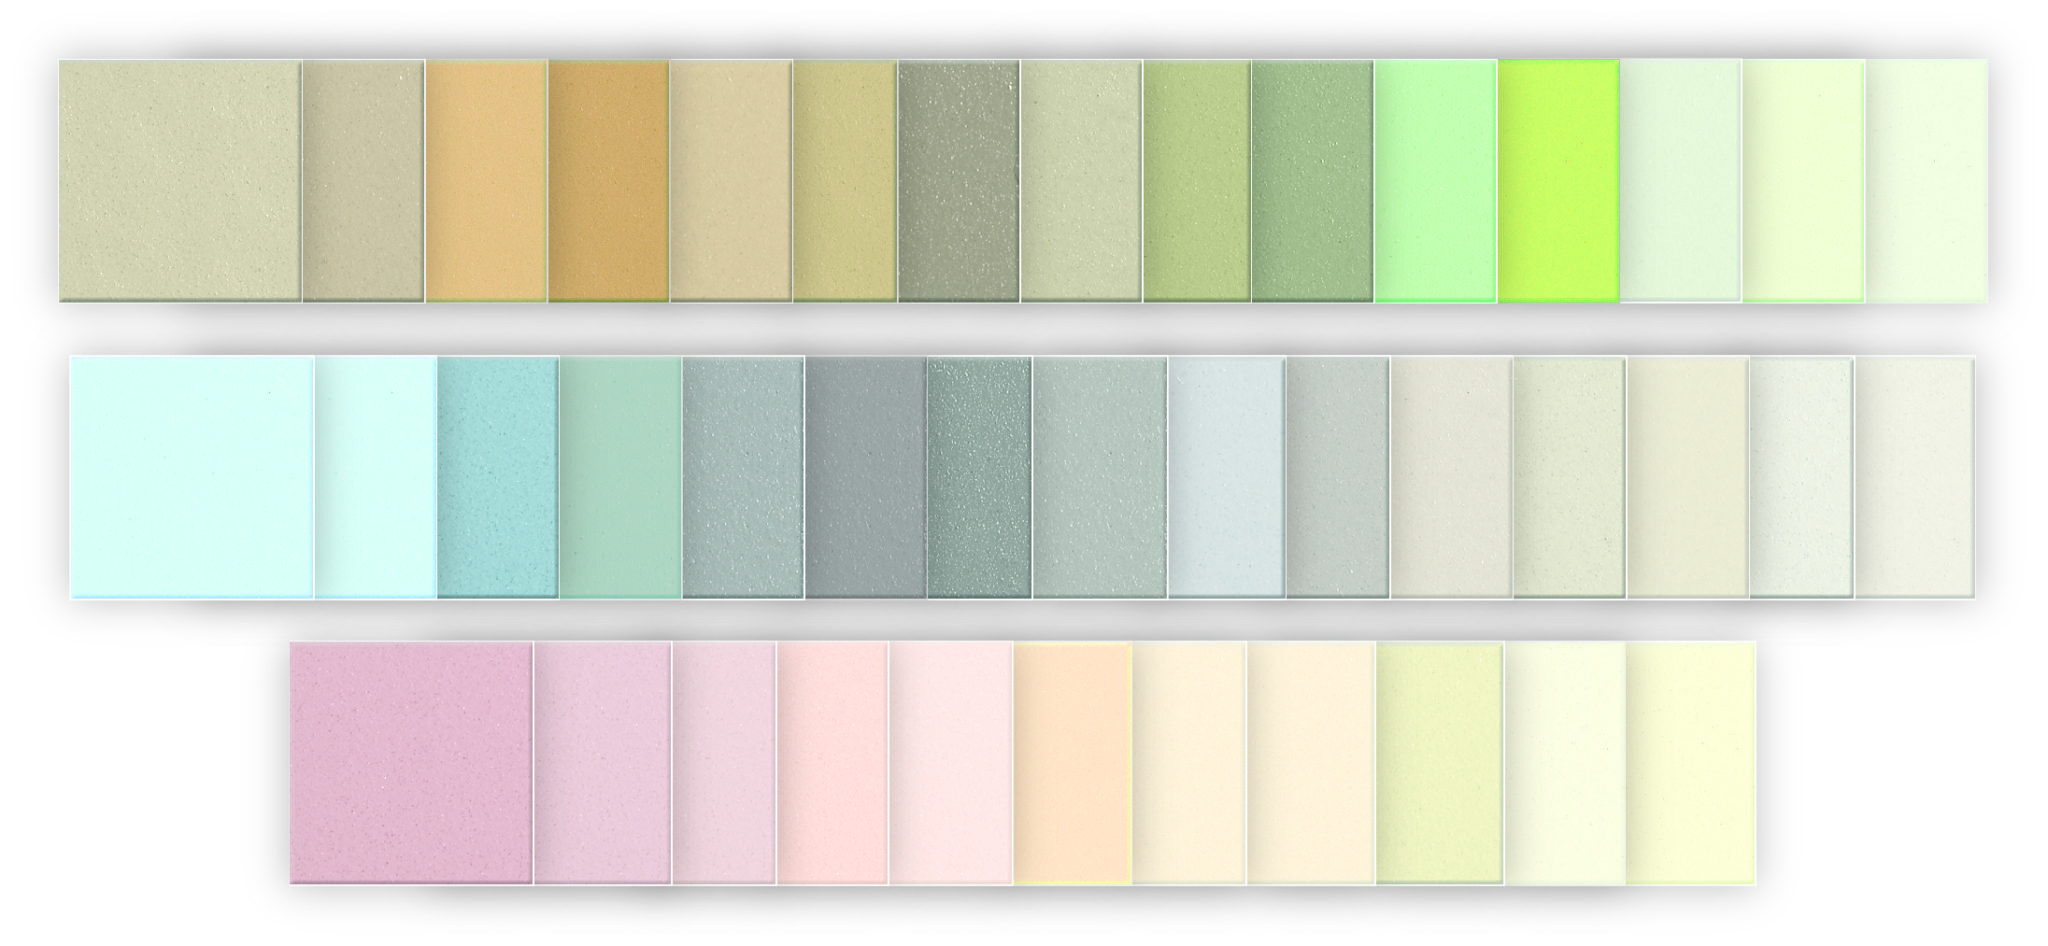 Tint_tile_swatches